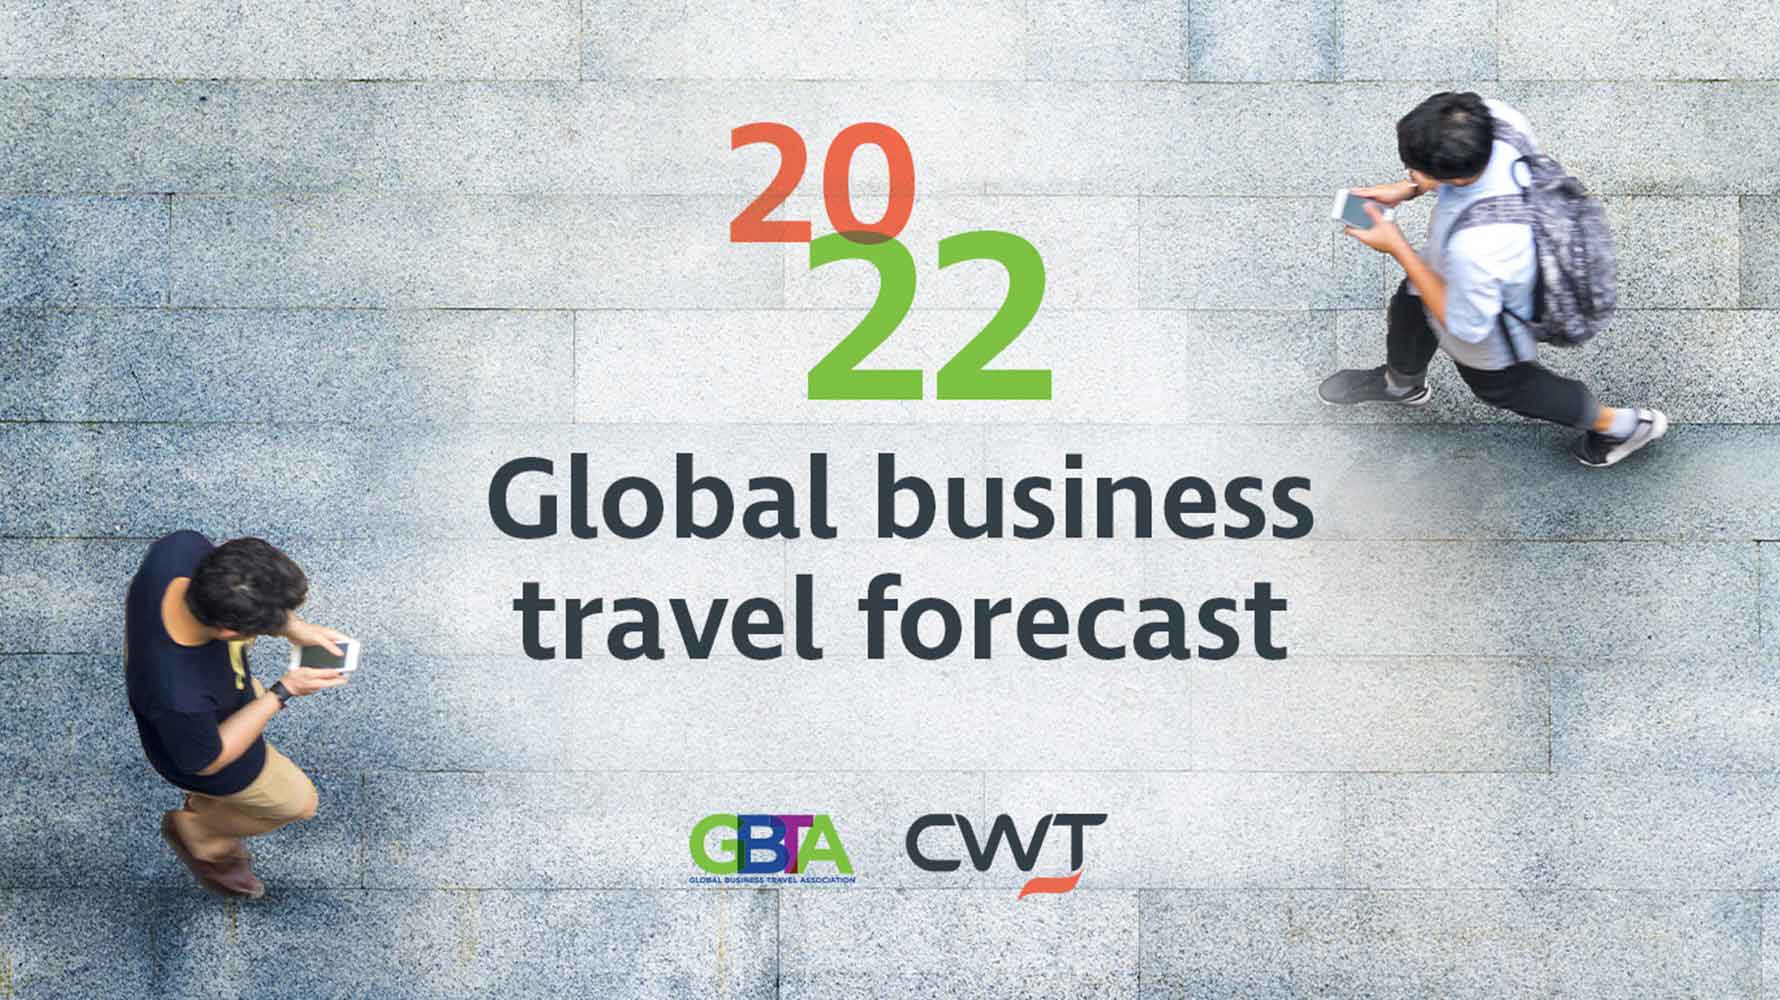 Global business travel pricing set to increase in 2022